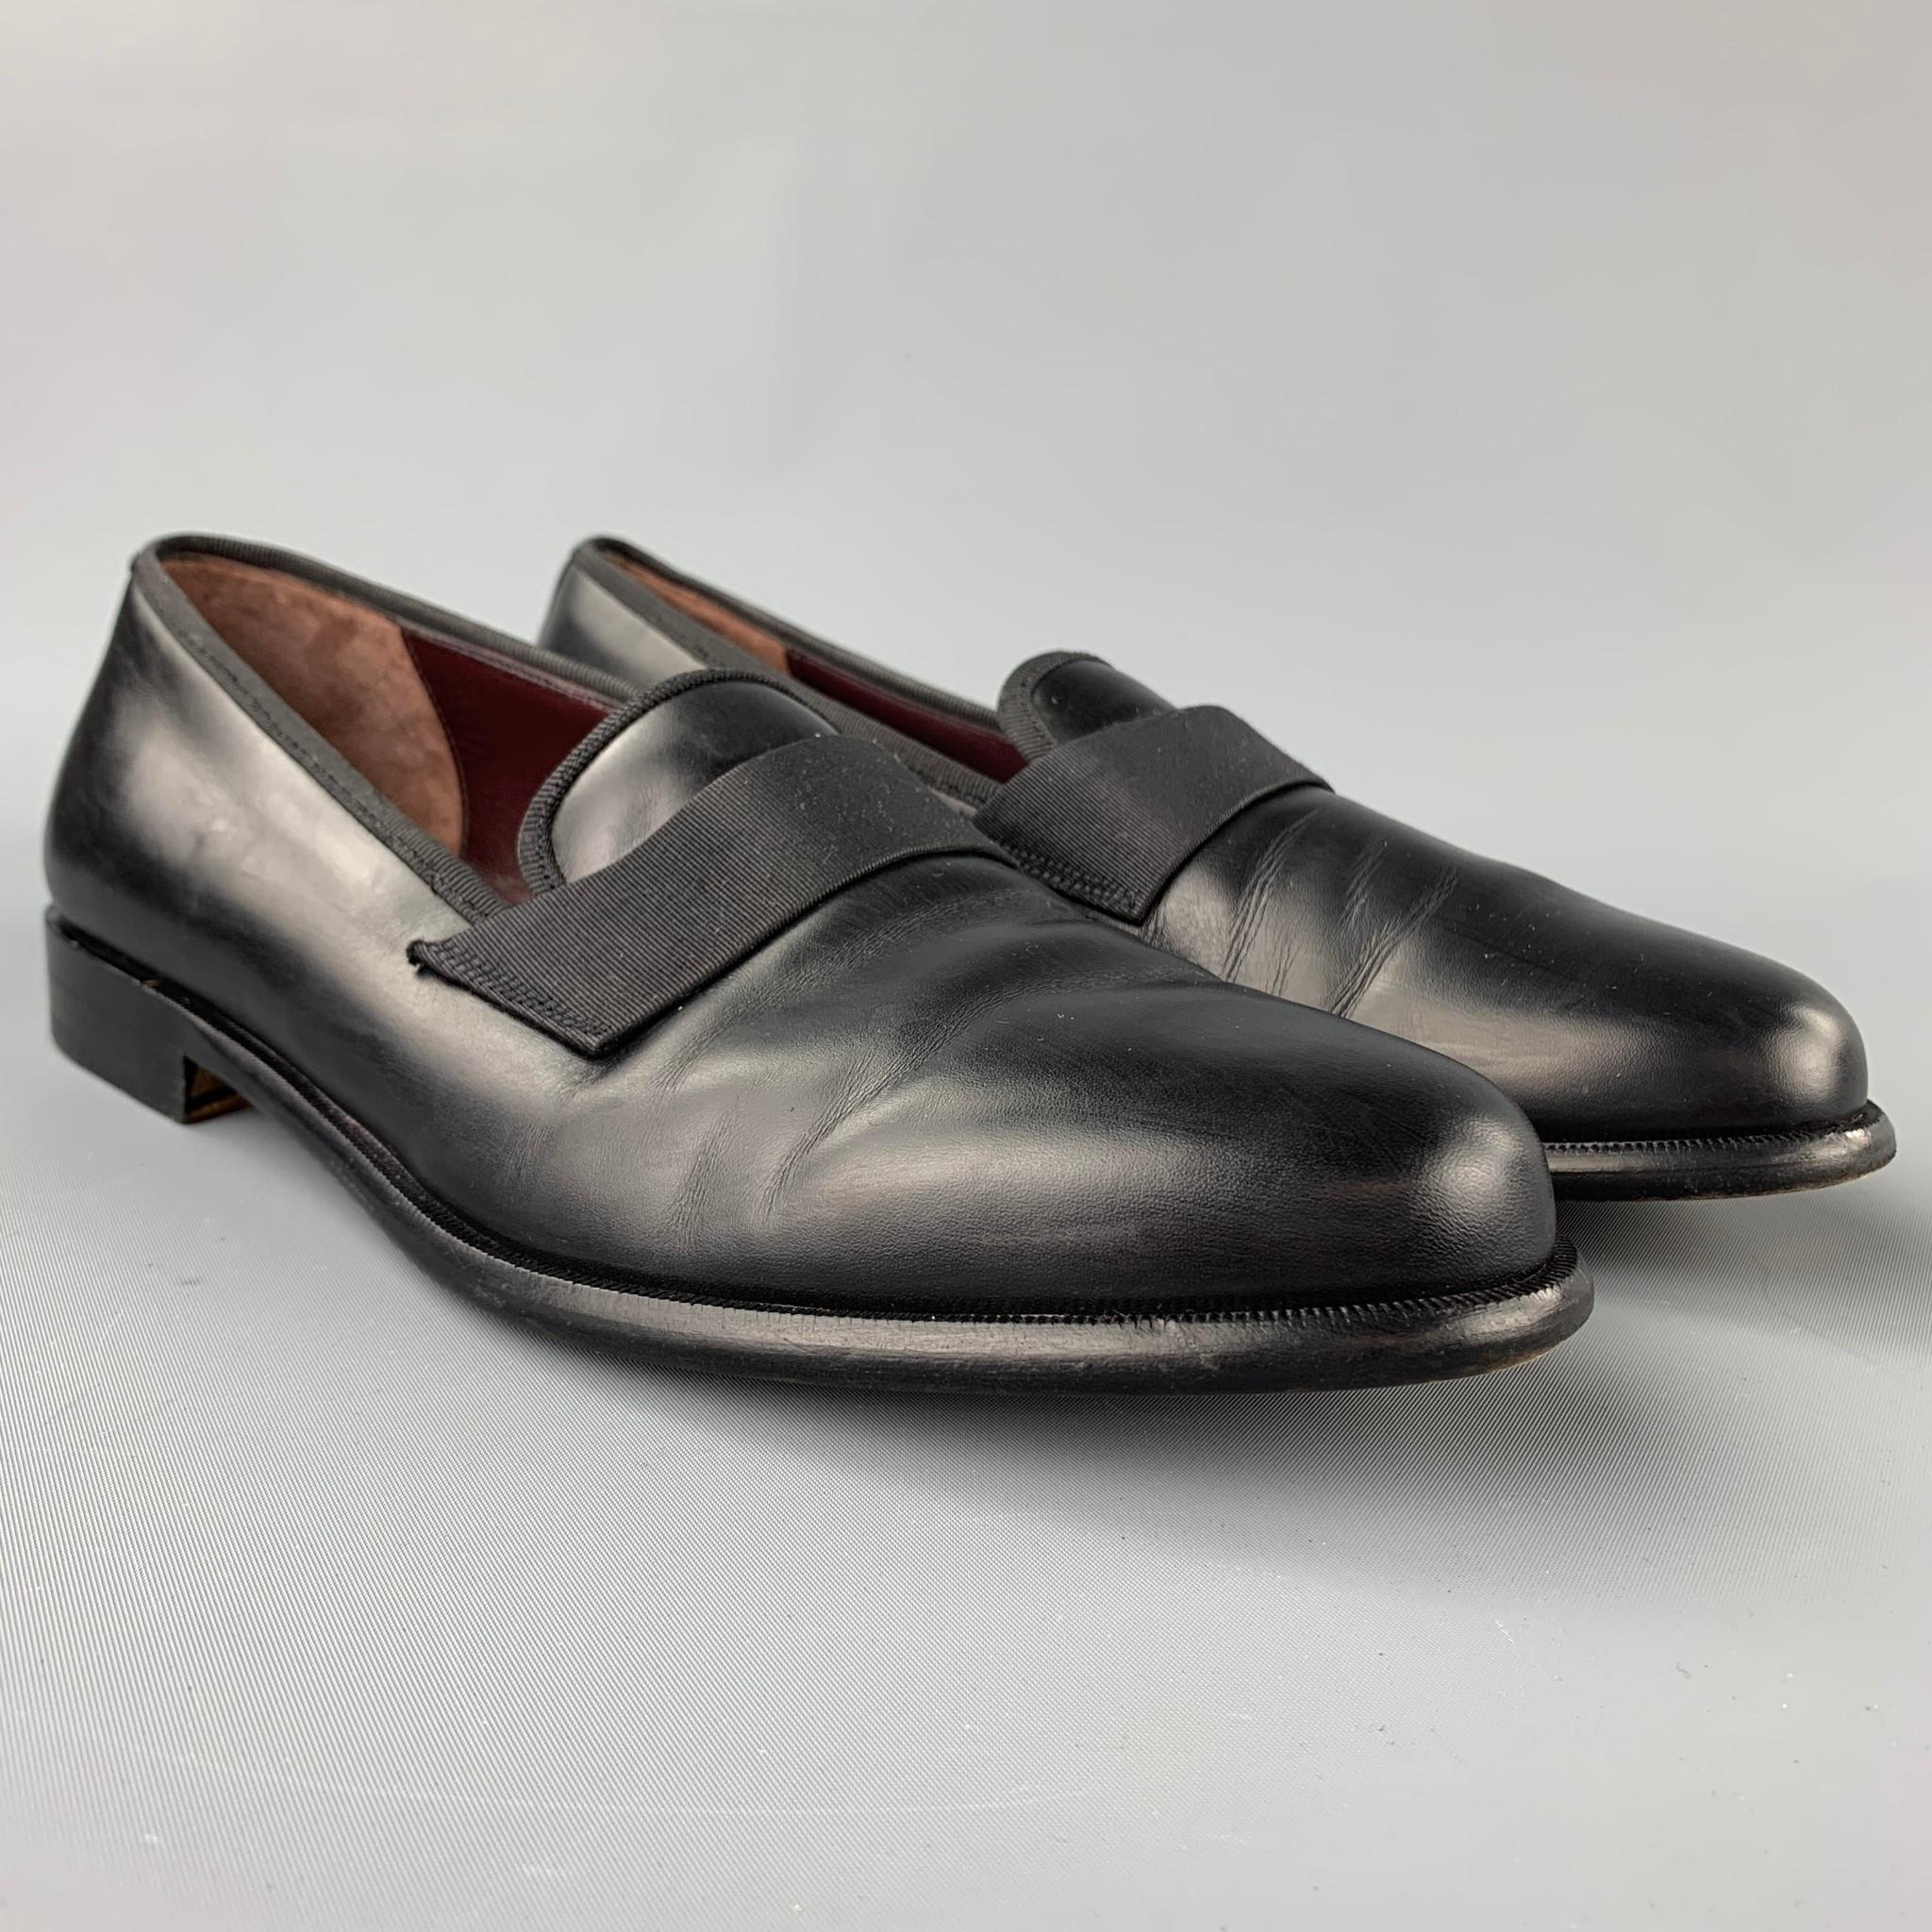 SALVATORE FERRAGAMO loafers comes in a black leather featuring a grosgrain strap, slip on, and a wooden sole. Made in Italy.

Good Pre-Owned Condition.
Marked: UI 6500 3/7 11 D

Measurements:

12 in. x 4 in. 